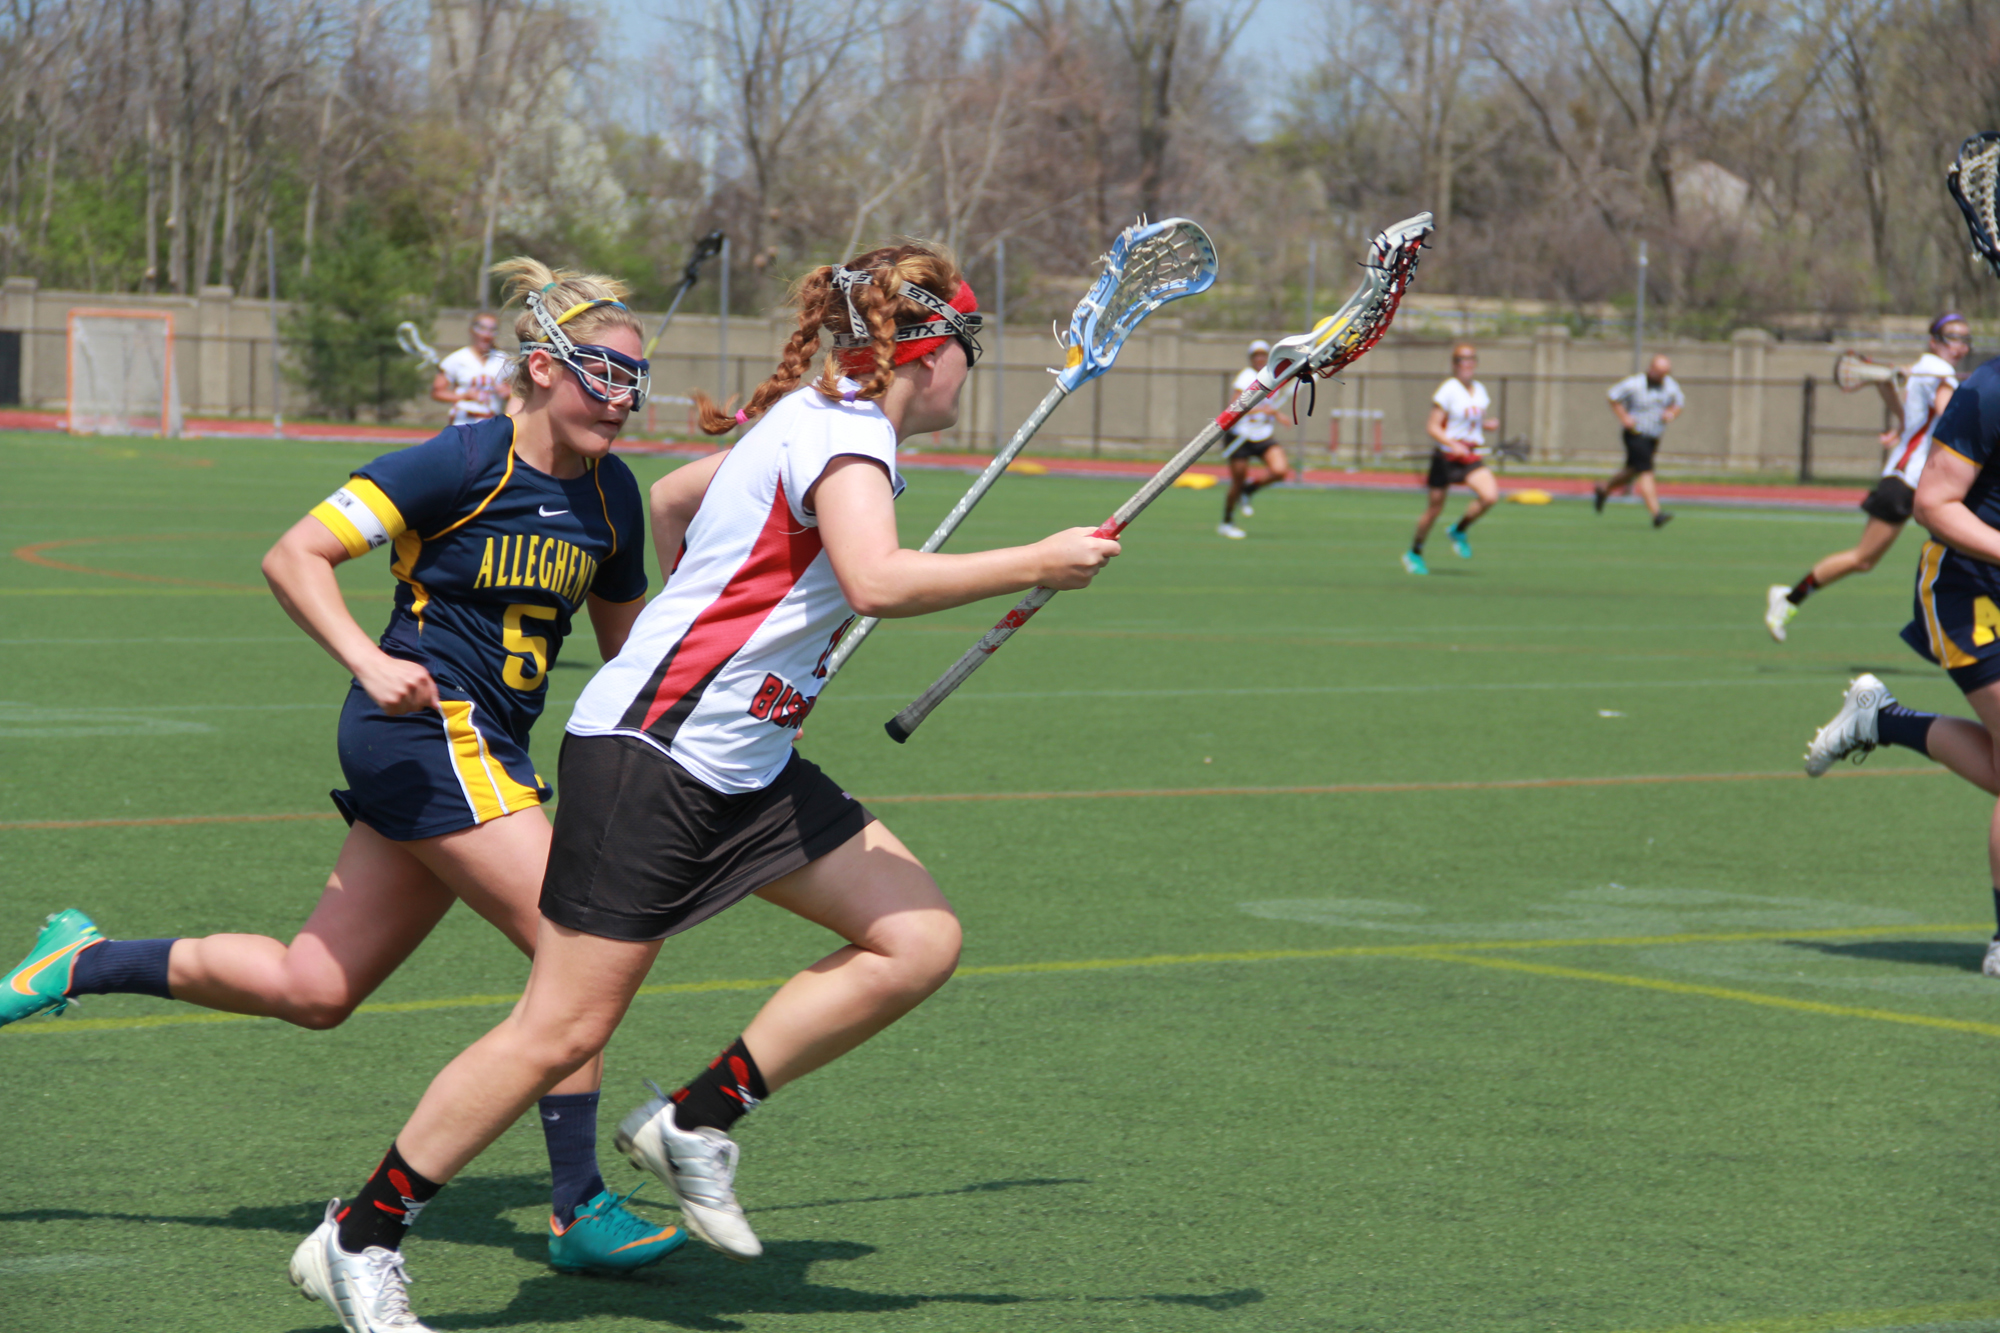 Sophomore Patricia Ryan runs past a defender to score one of her two goals.